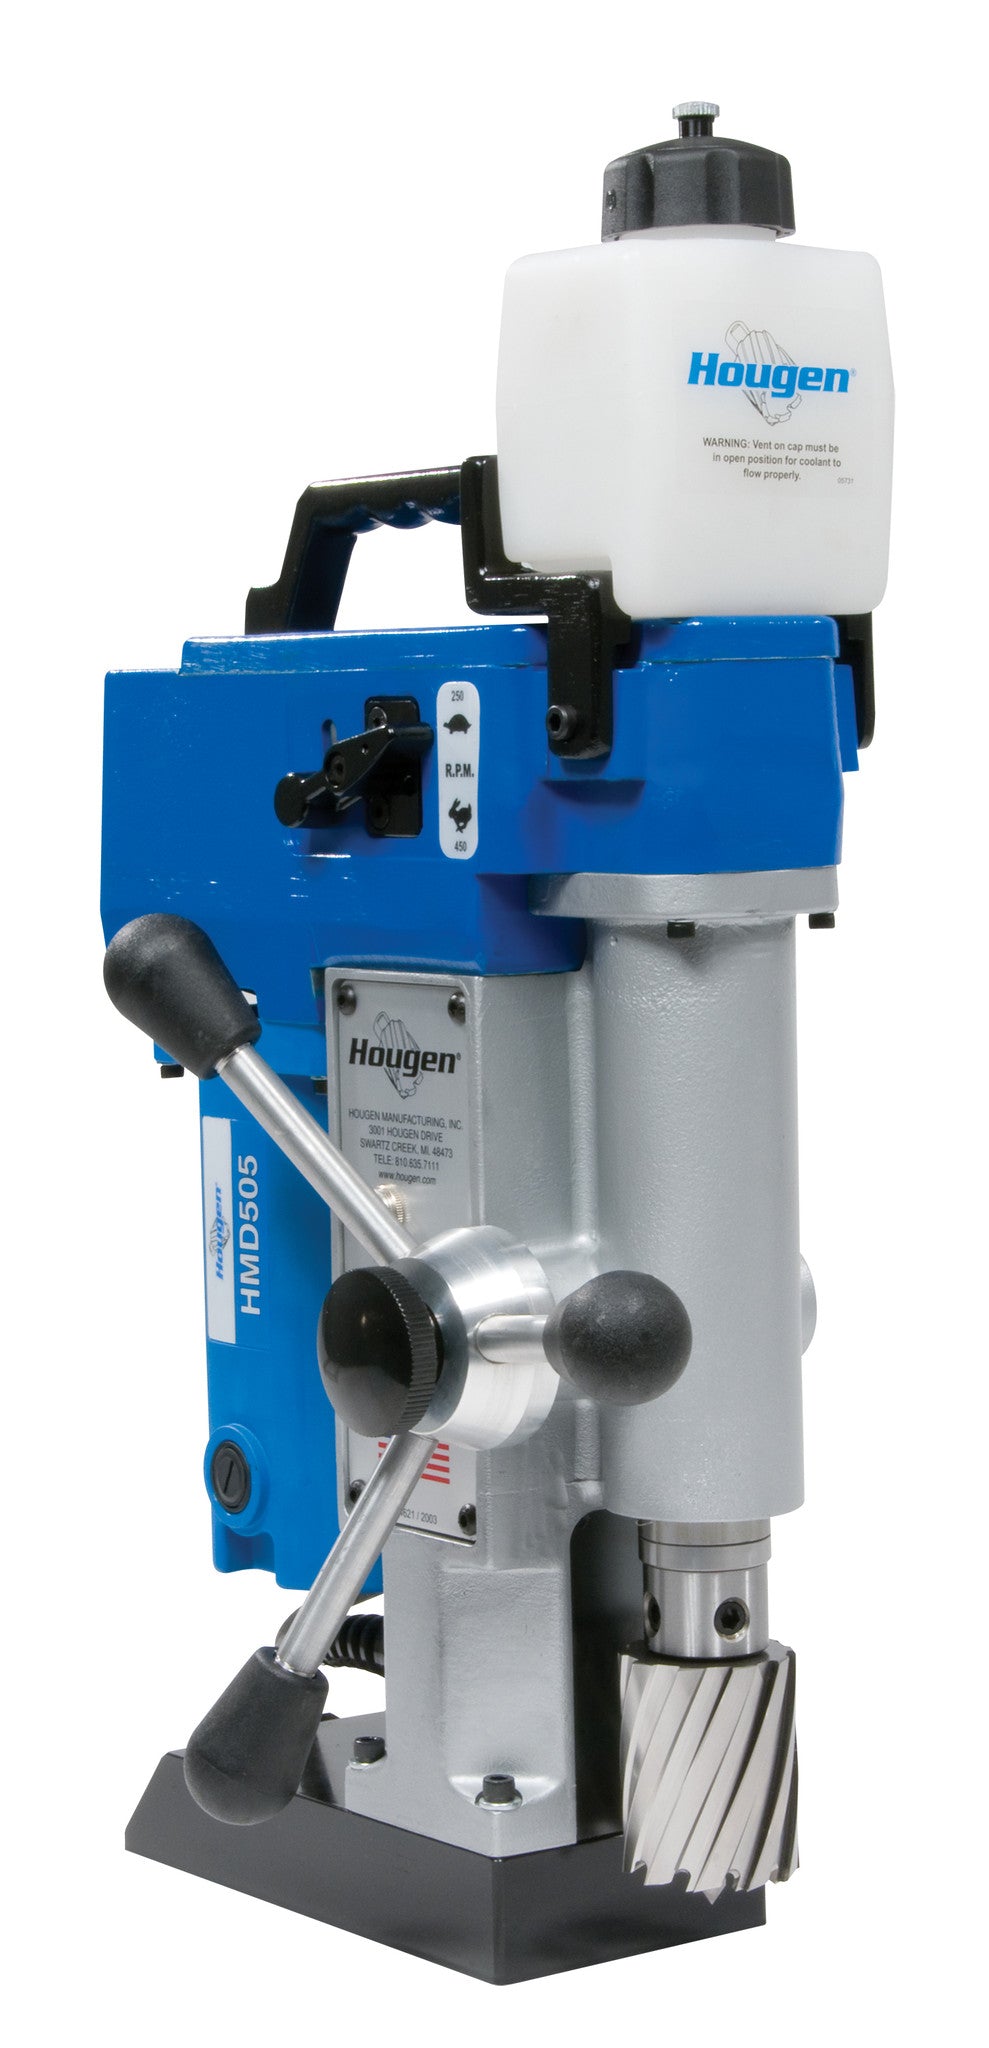 Hougen HMD505 and HMD508 Portable Magnetic Drill